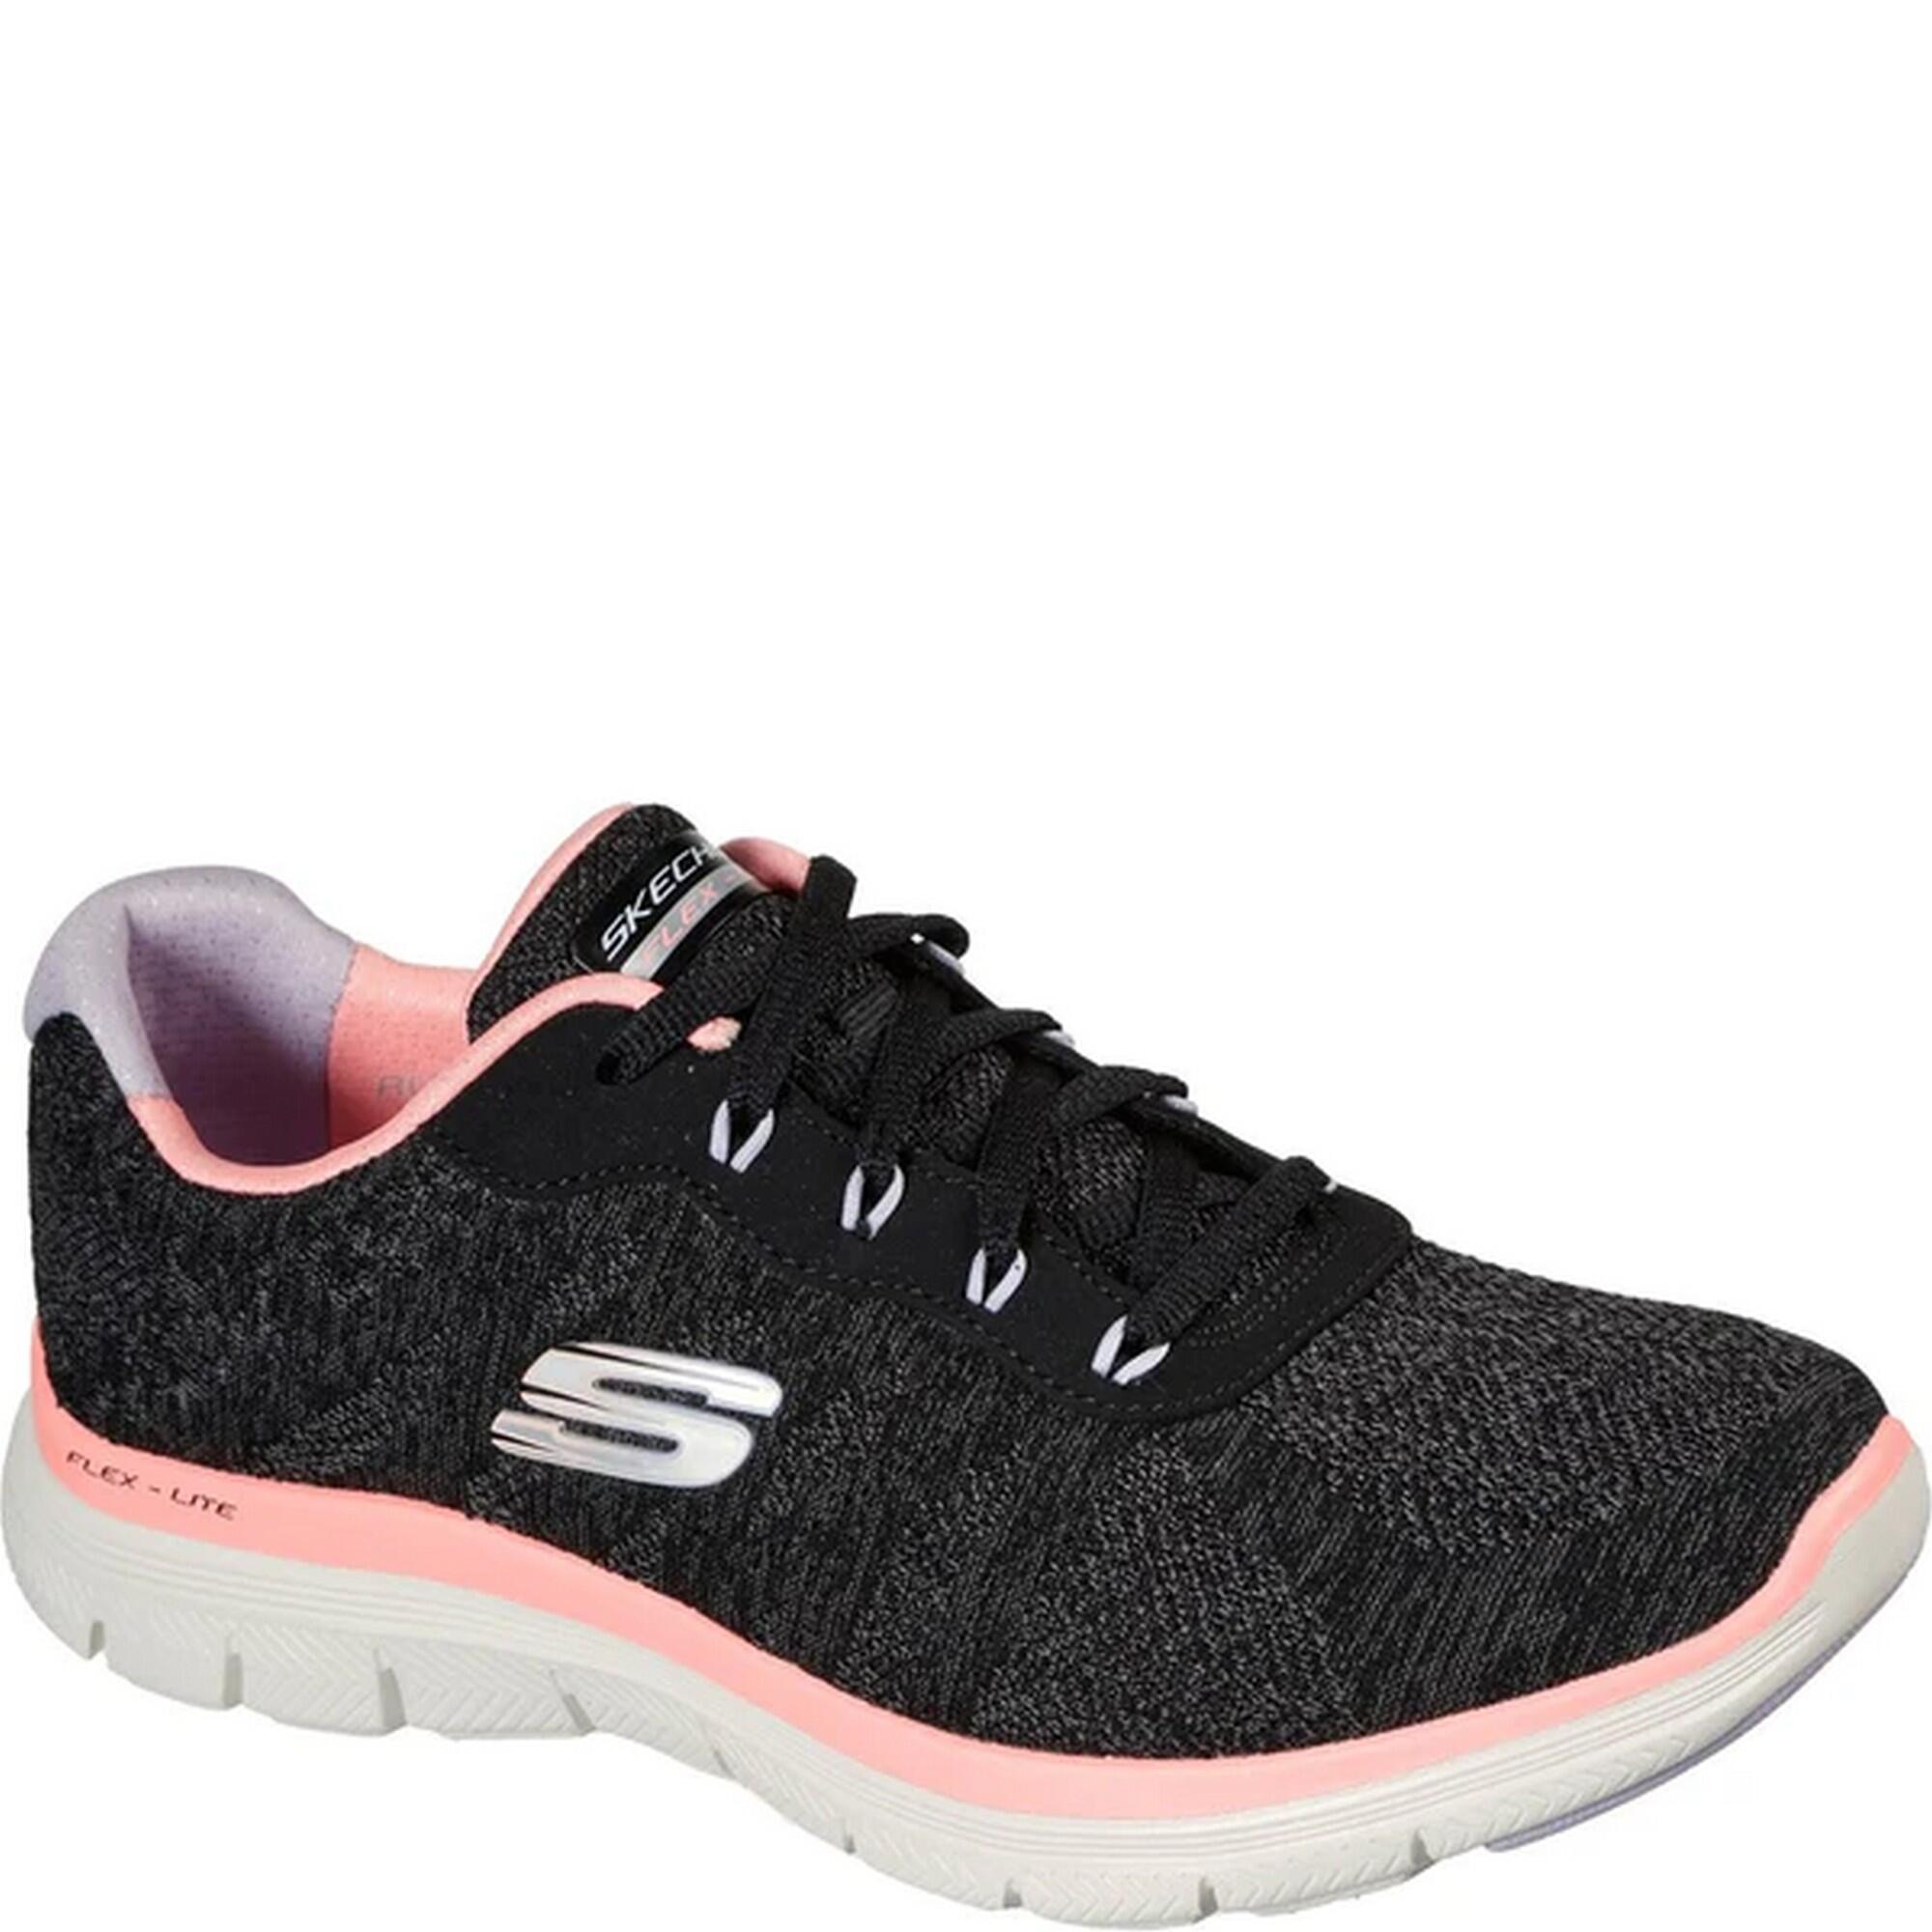 SKECHERS Womens/Ladies Appeal 4.0 Fresh Move Trainers (Black/Coral)